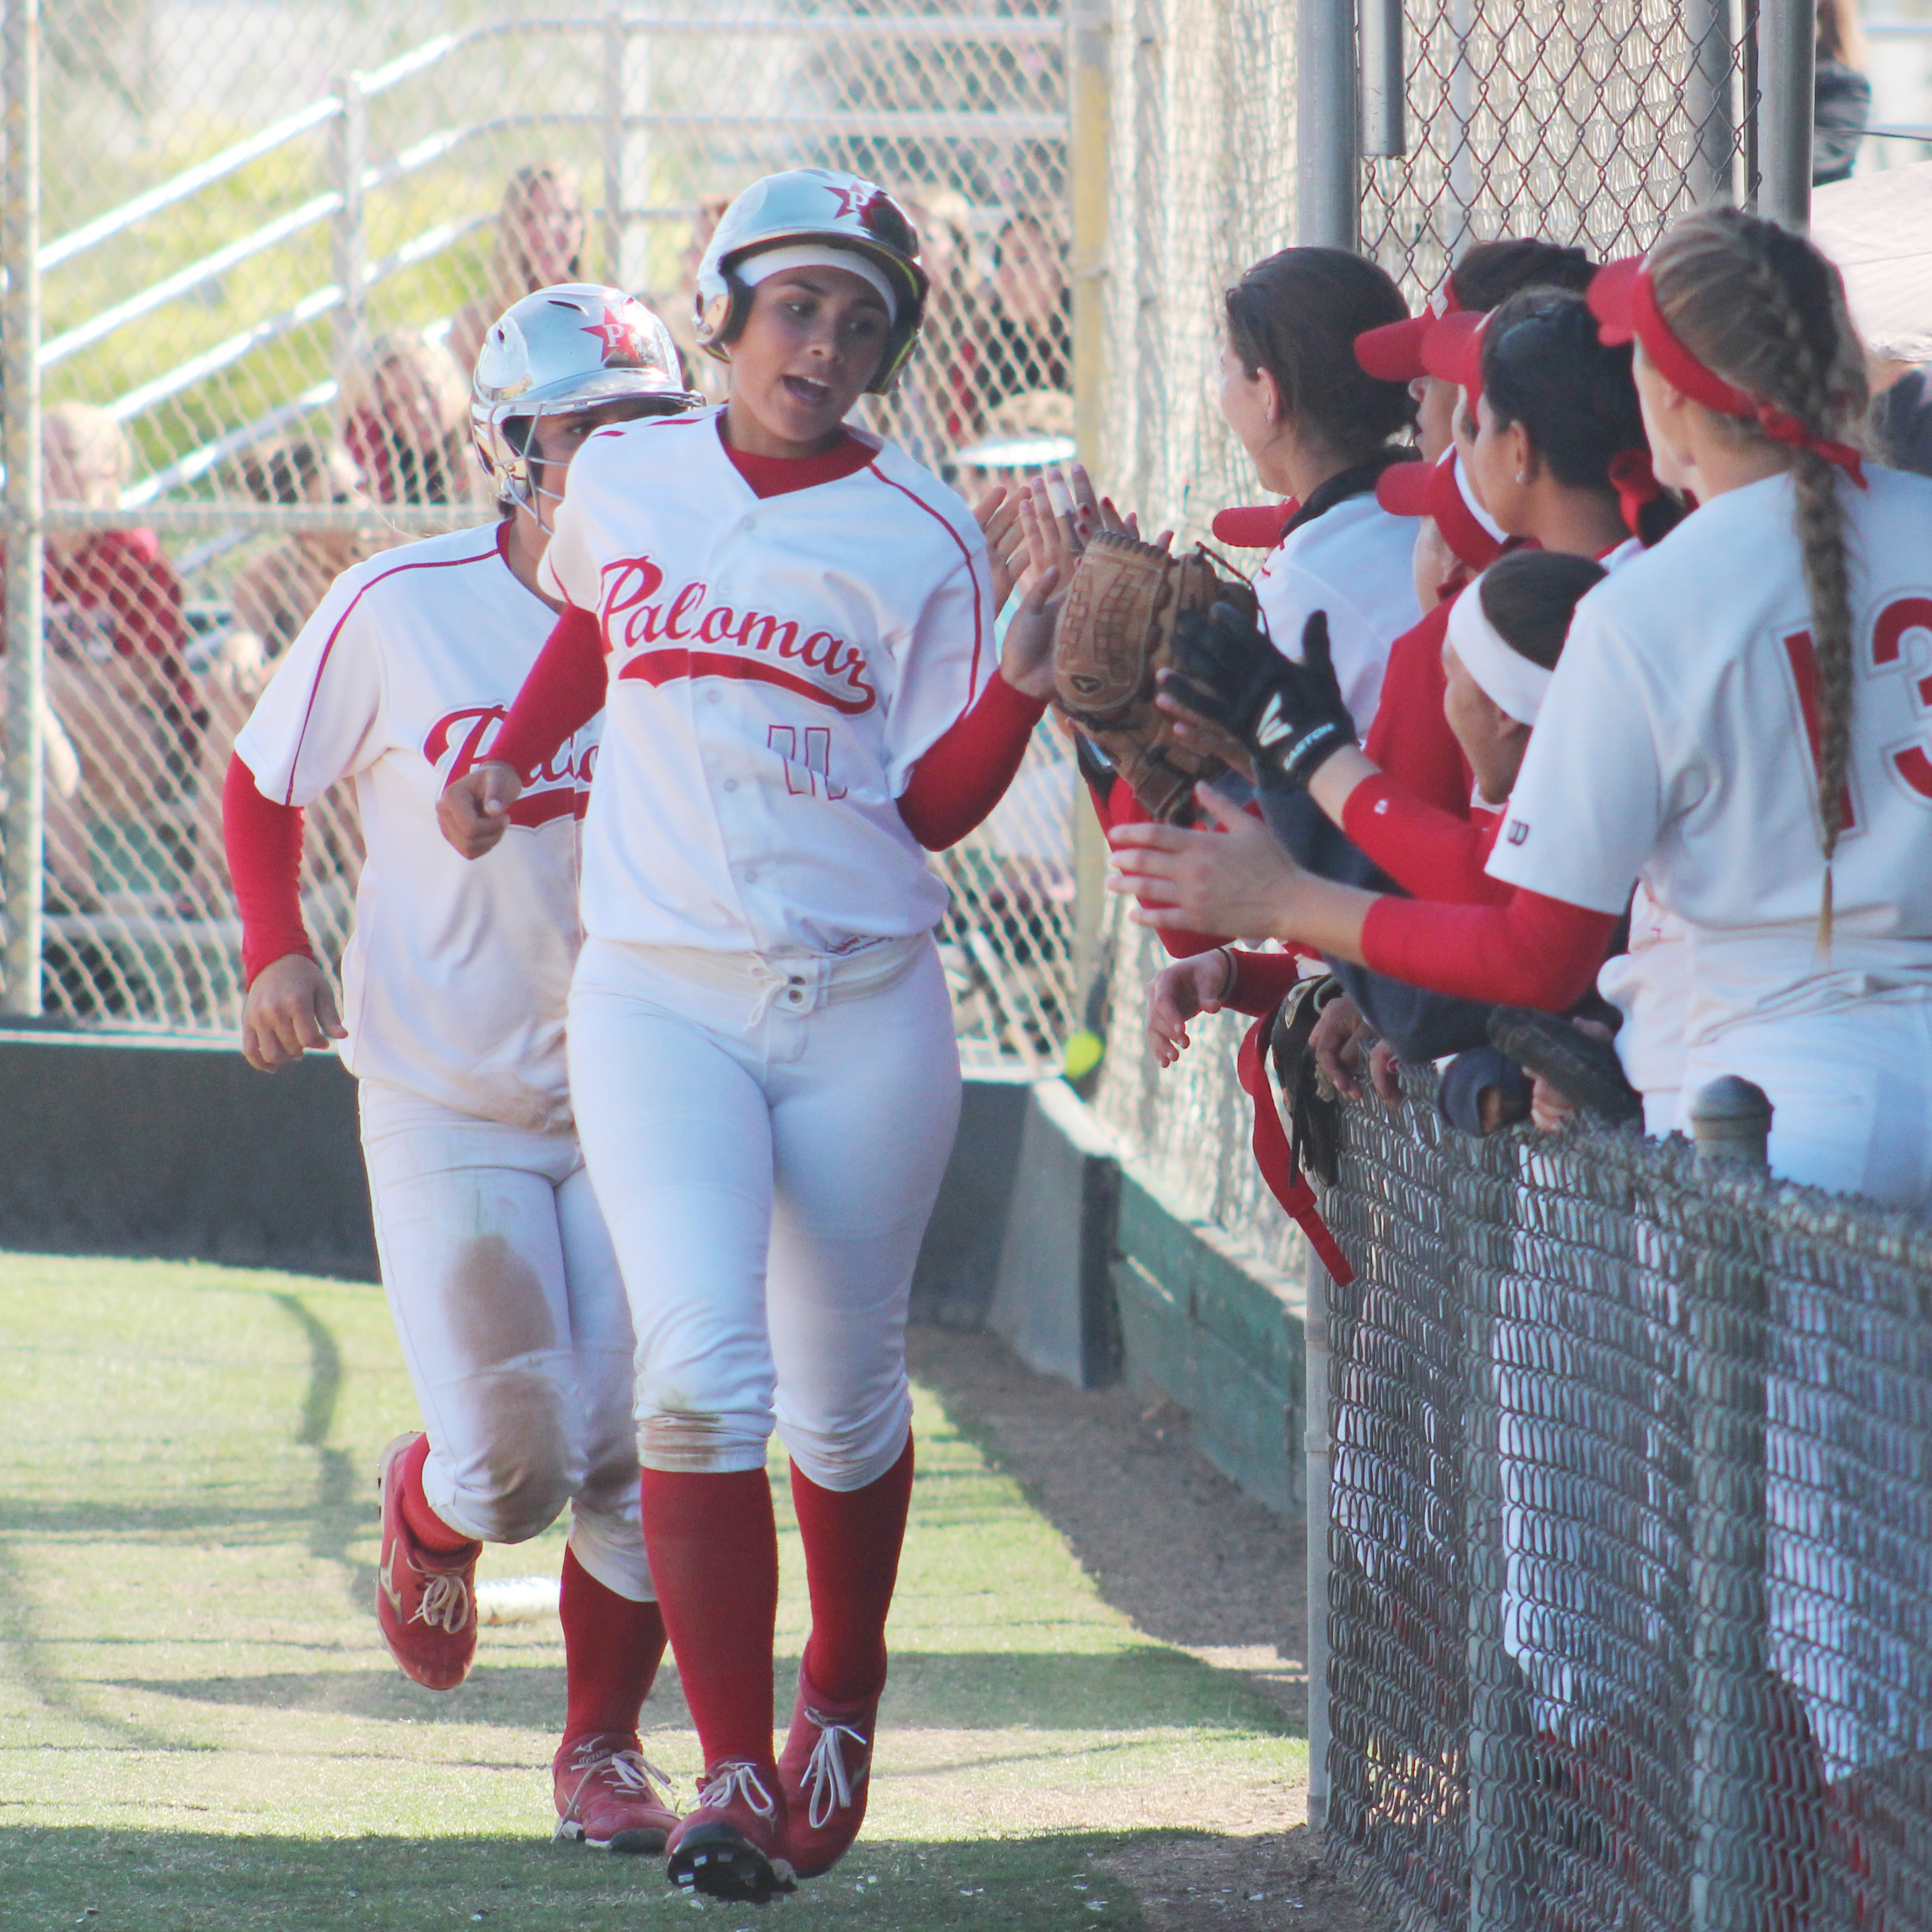 Palomar’s softball team congratulates outfielder Keilani ‘KK’ Fronda and shortstop Kali Pugh after scoring on designated hitter Carlie Daniel’s RBI double against Riverside City College on April 15 at Palomar’s softball field. Fronda and Pugh both went 3-4 in the Comets’ 9-4 win over the Tigers in a rematch of the 2013 state title game when Palomar brought home a championship with a 7-2 win. (Scott Colson/The Telescope)